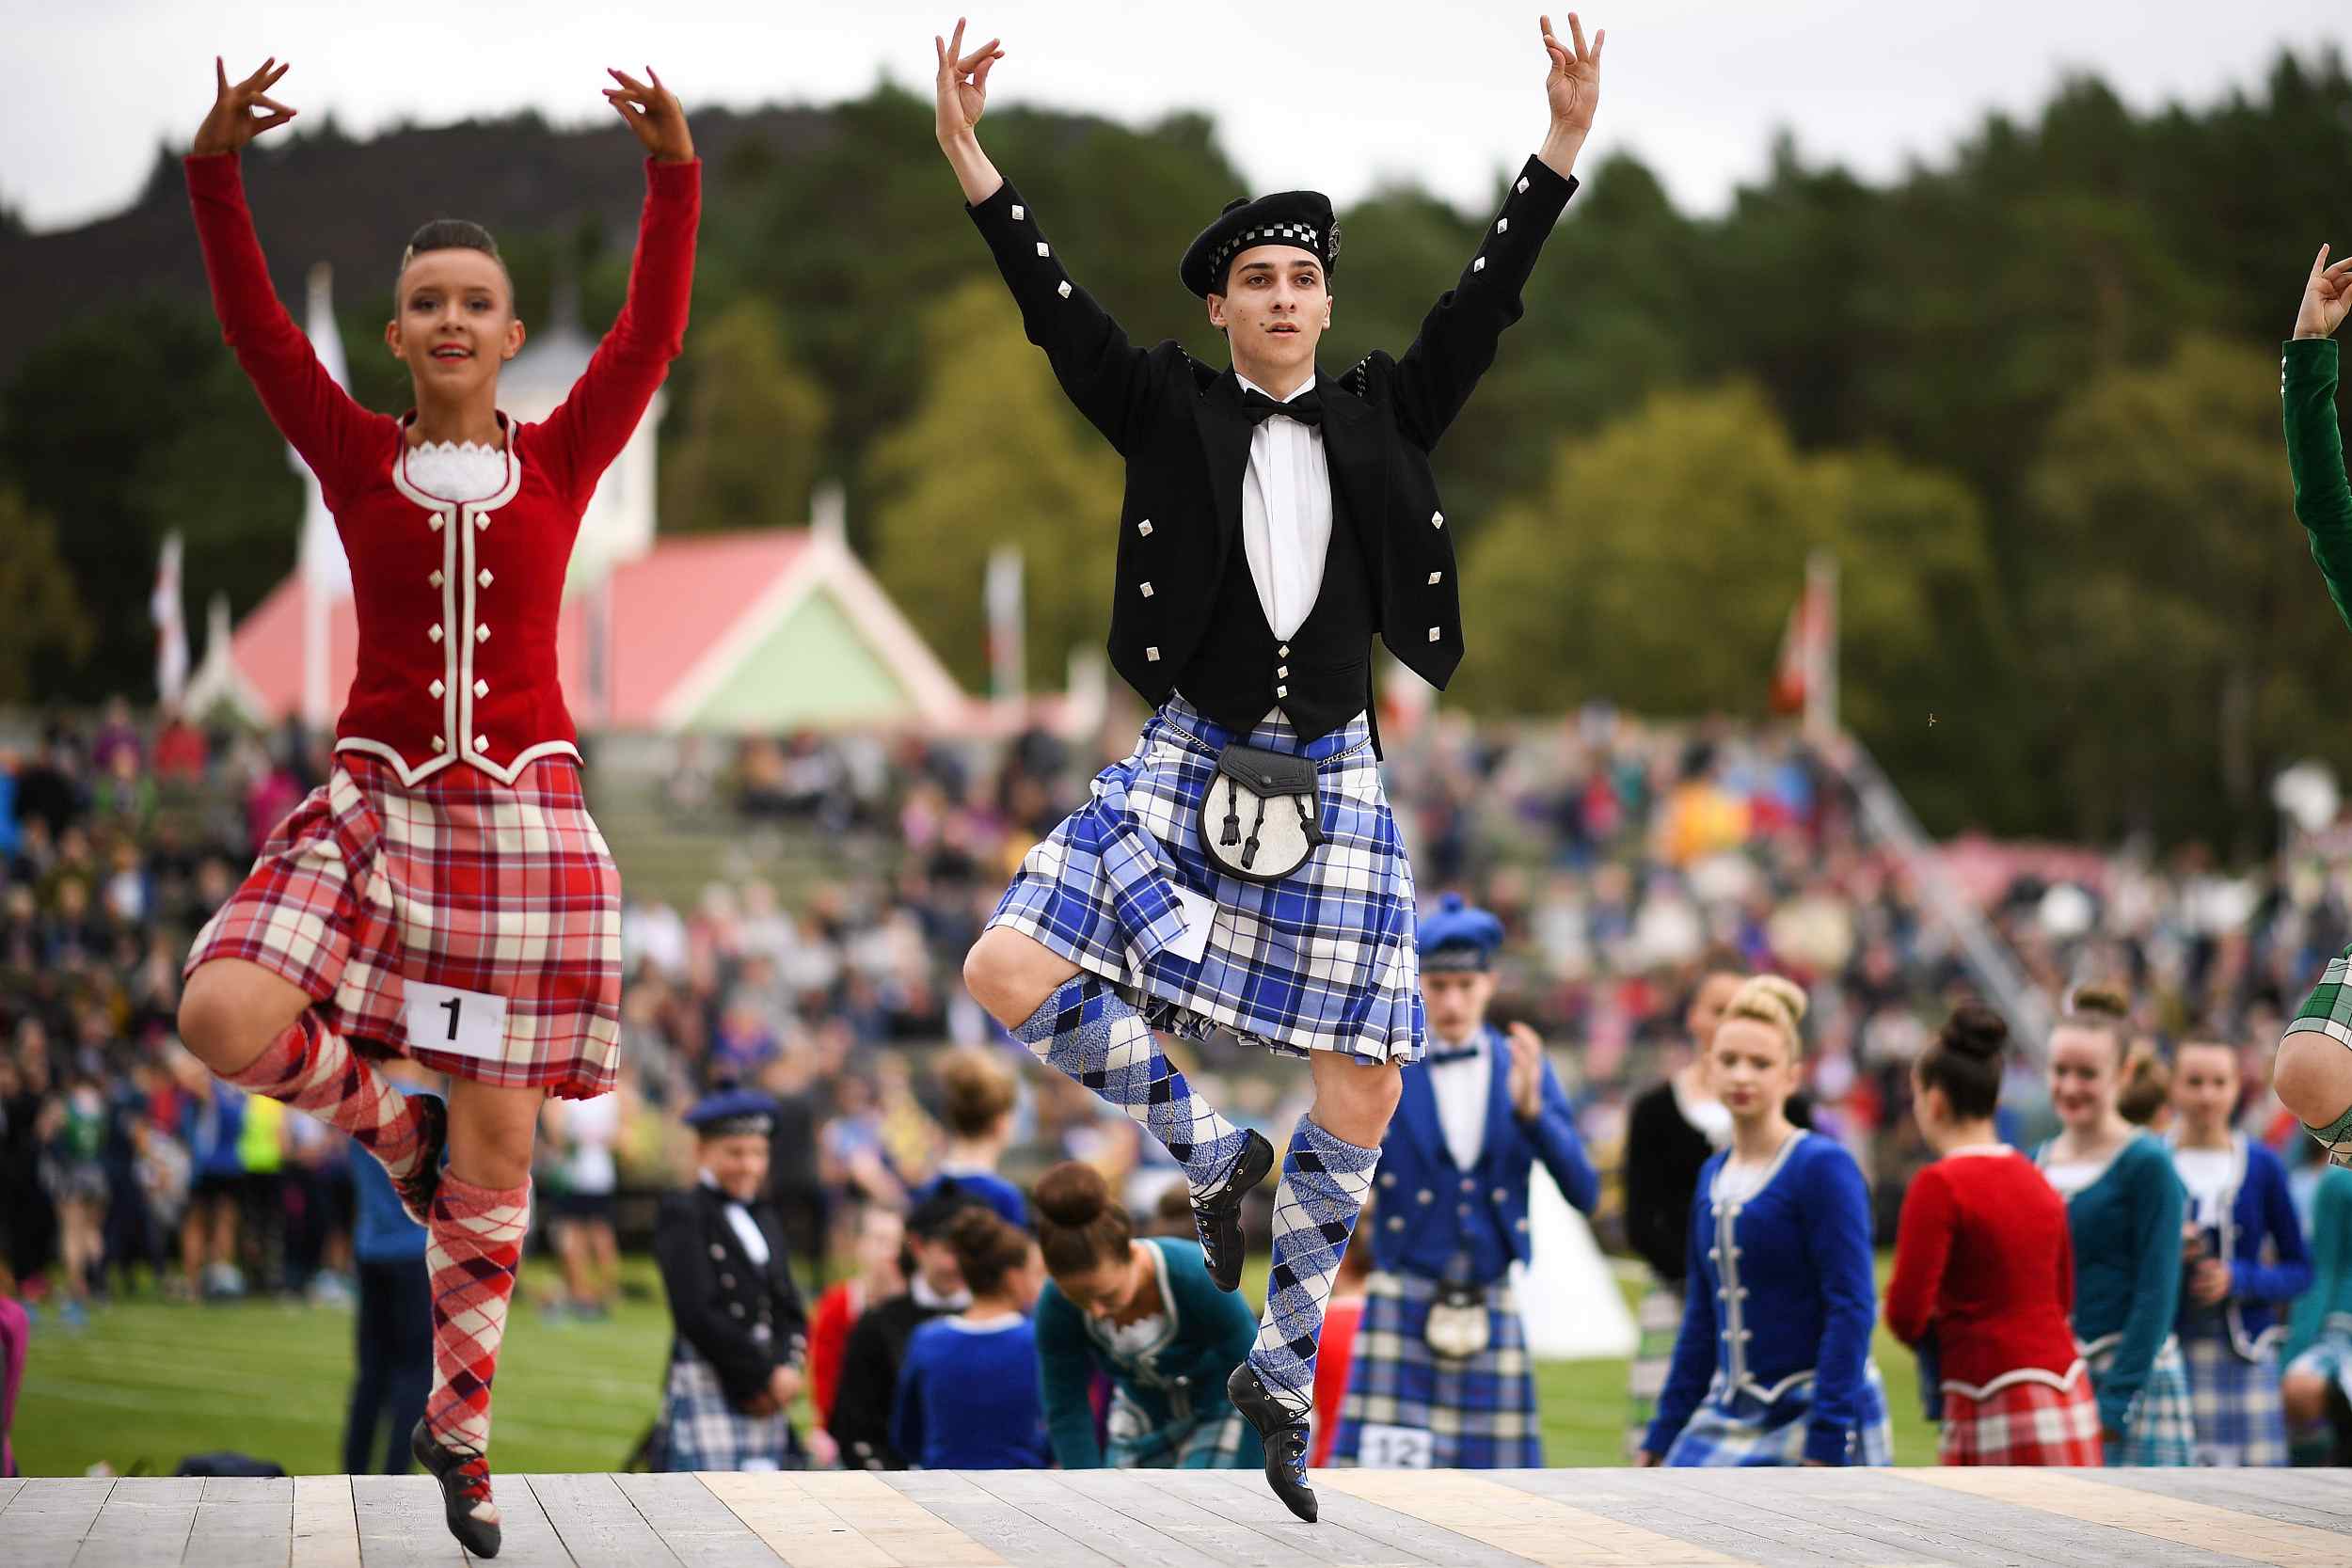 The Braemar Gathering commences in Scotland CGTN